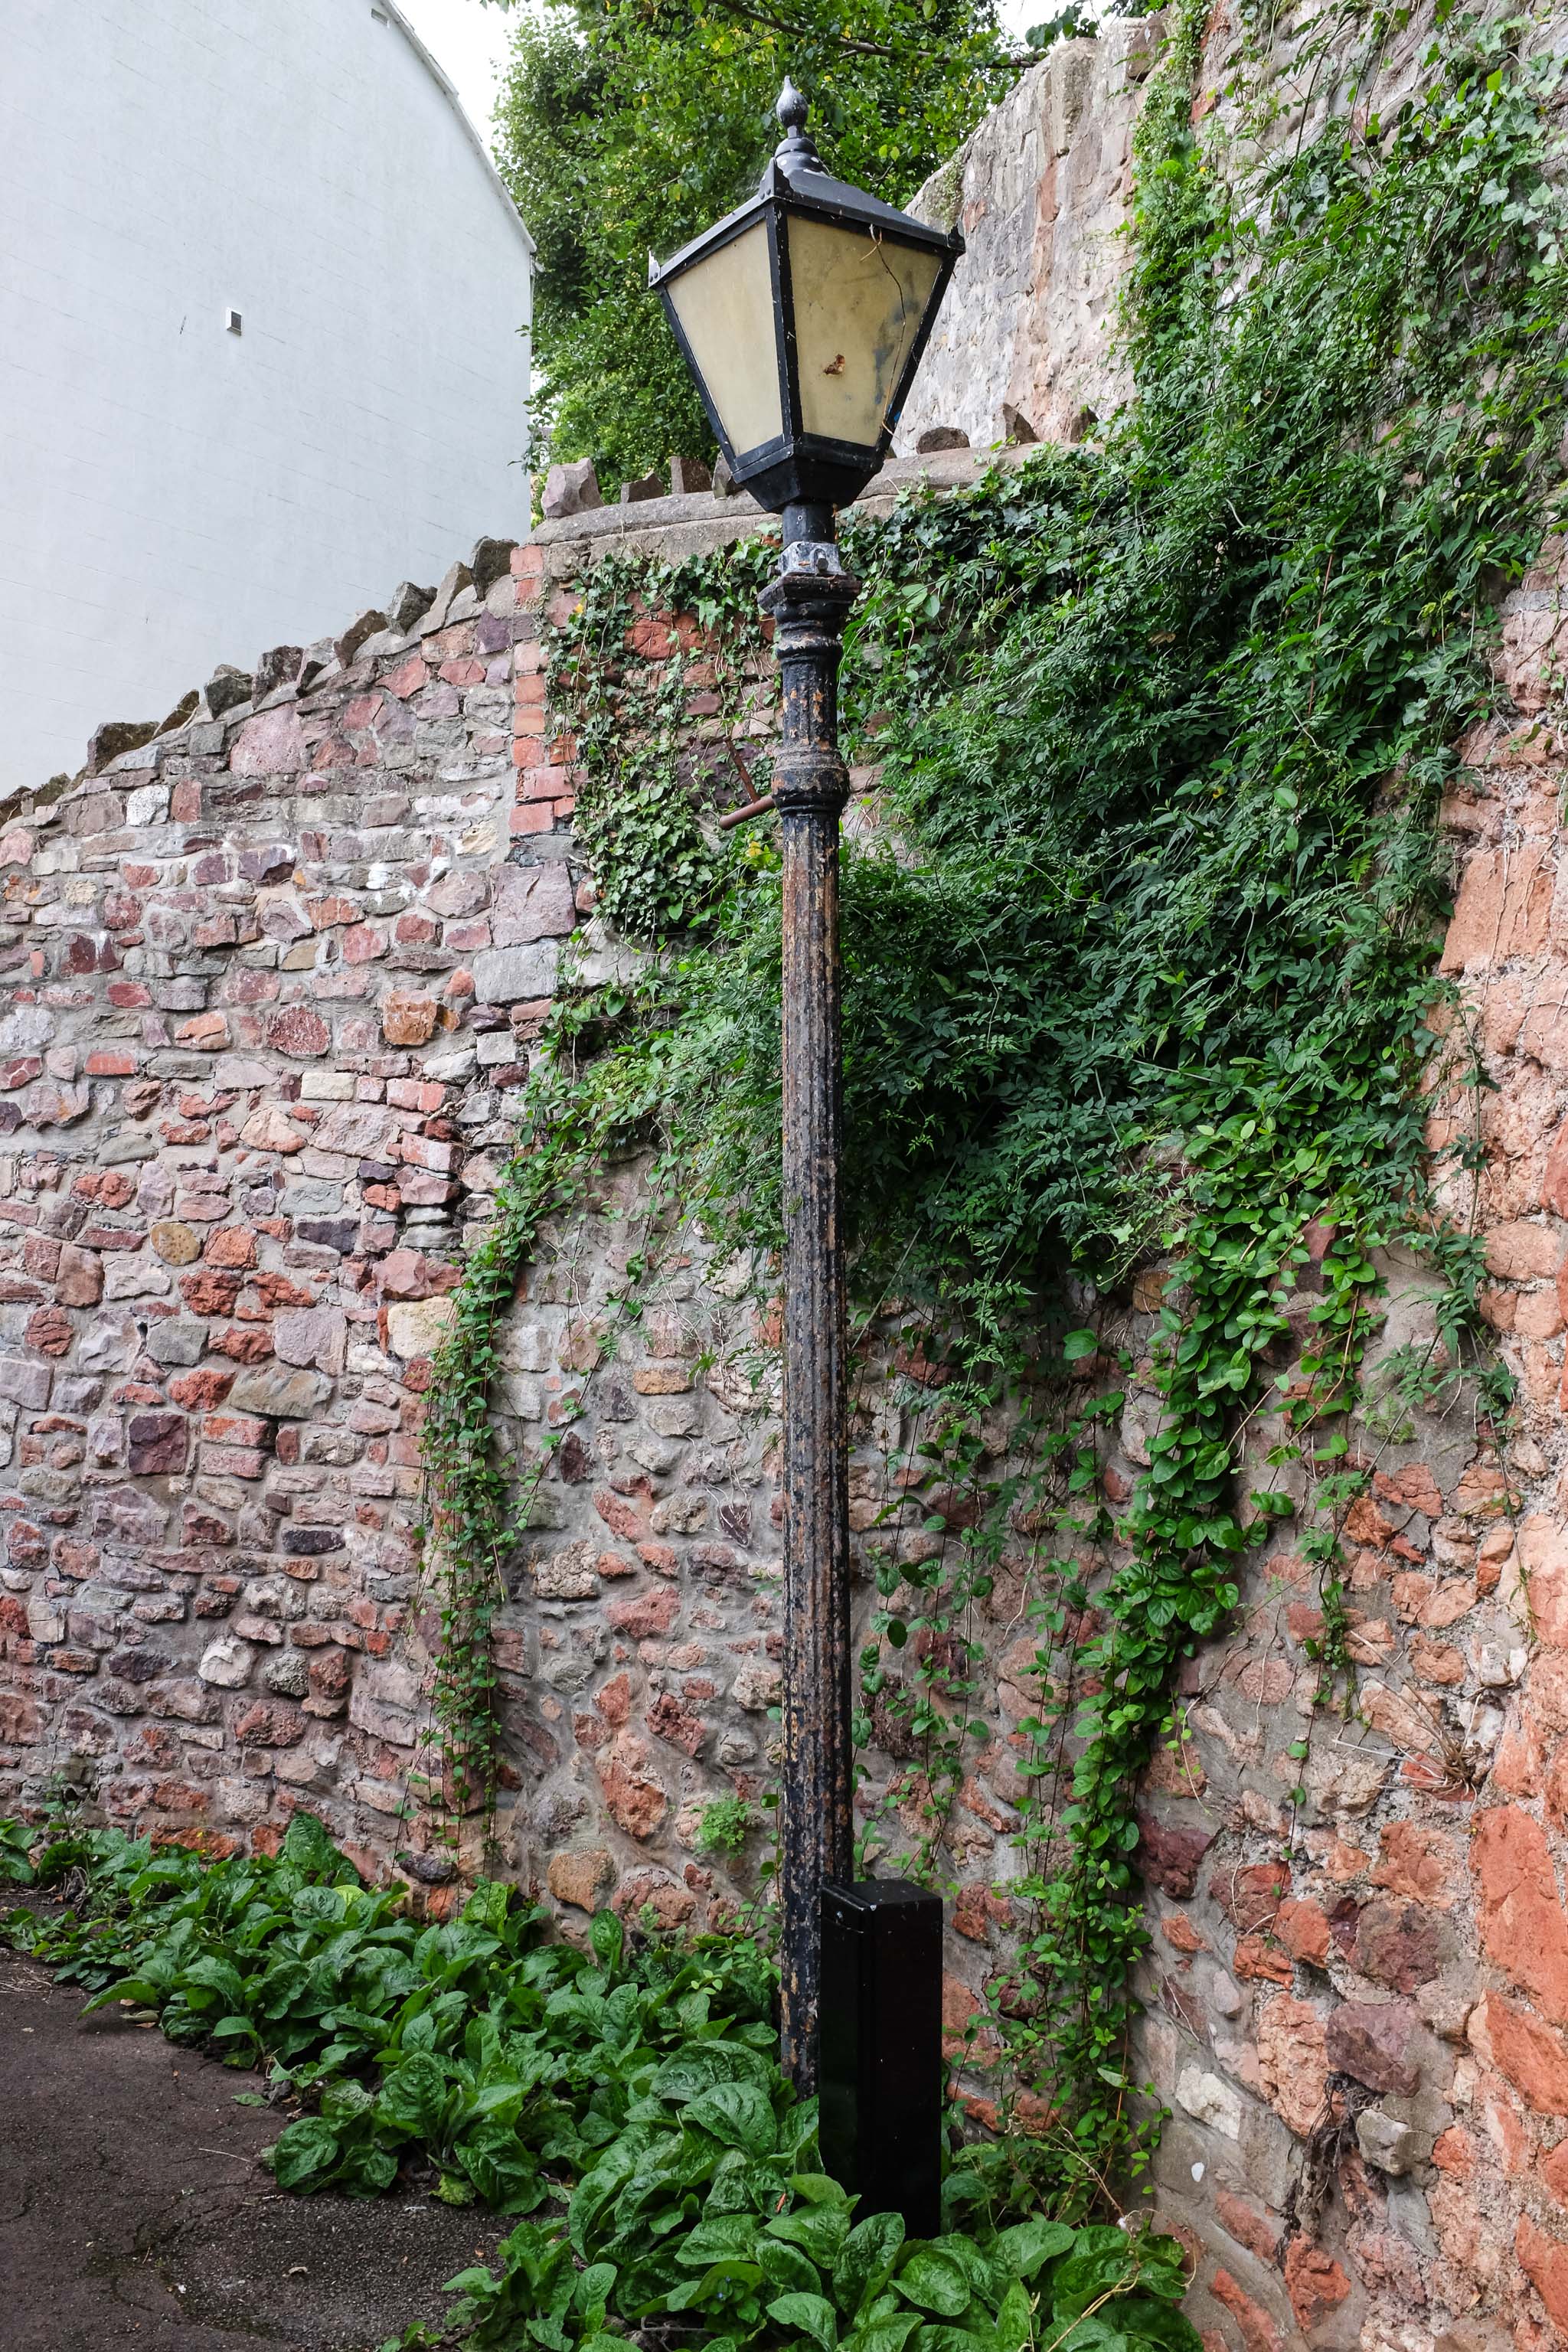 Rust to Rust
One of many exemplars of the sorry state of the historic cast iron lamp posts of Clifton Village. I get the feeling that the Council wish they'd al...